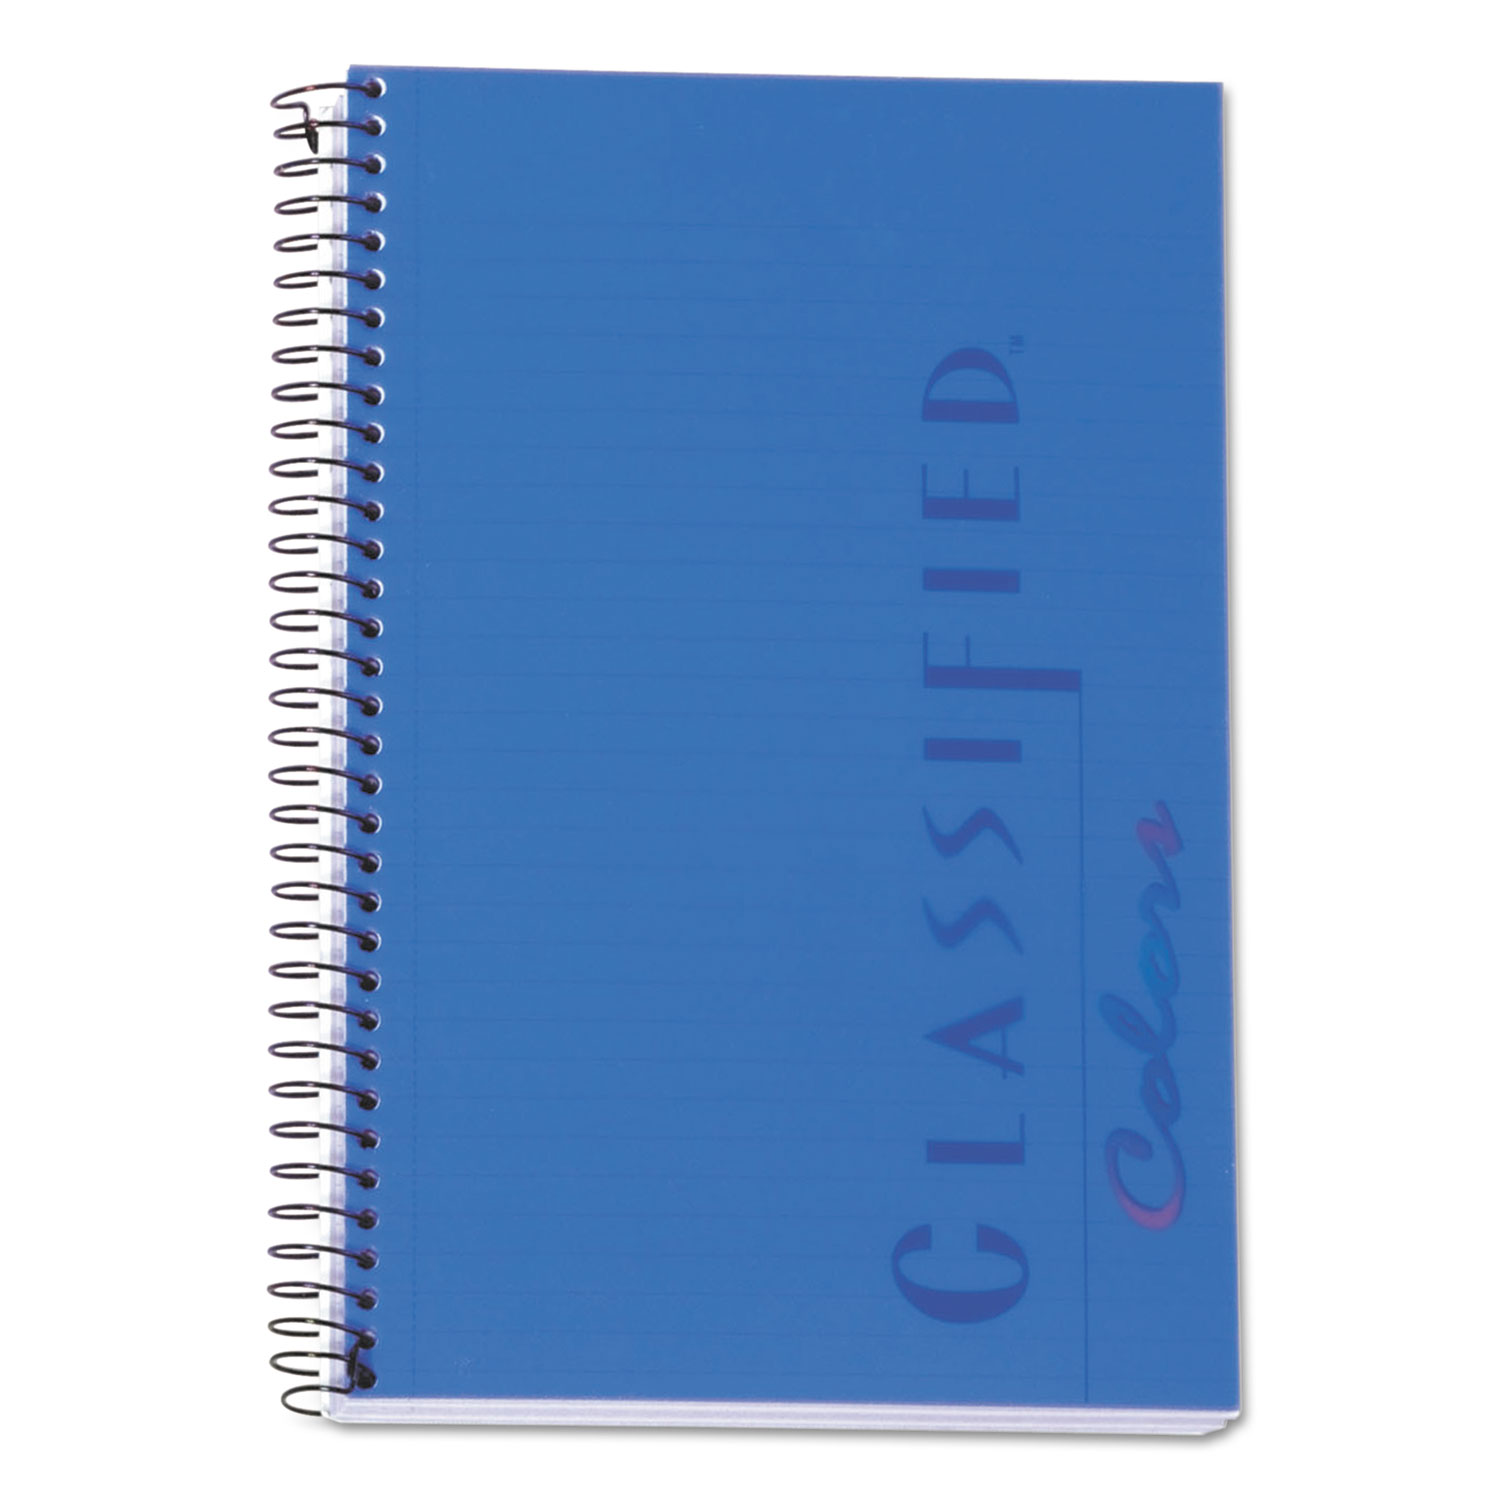  TOPS 73506 Color Notebooks, 1 Subject, Narrow Rule, Indigo Blue Cover, 8.5 x 5.5, 100 Sheets (TOP73506) 